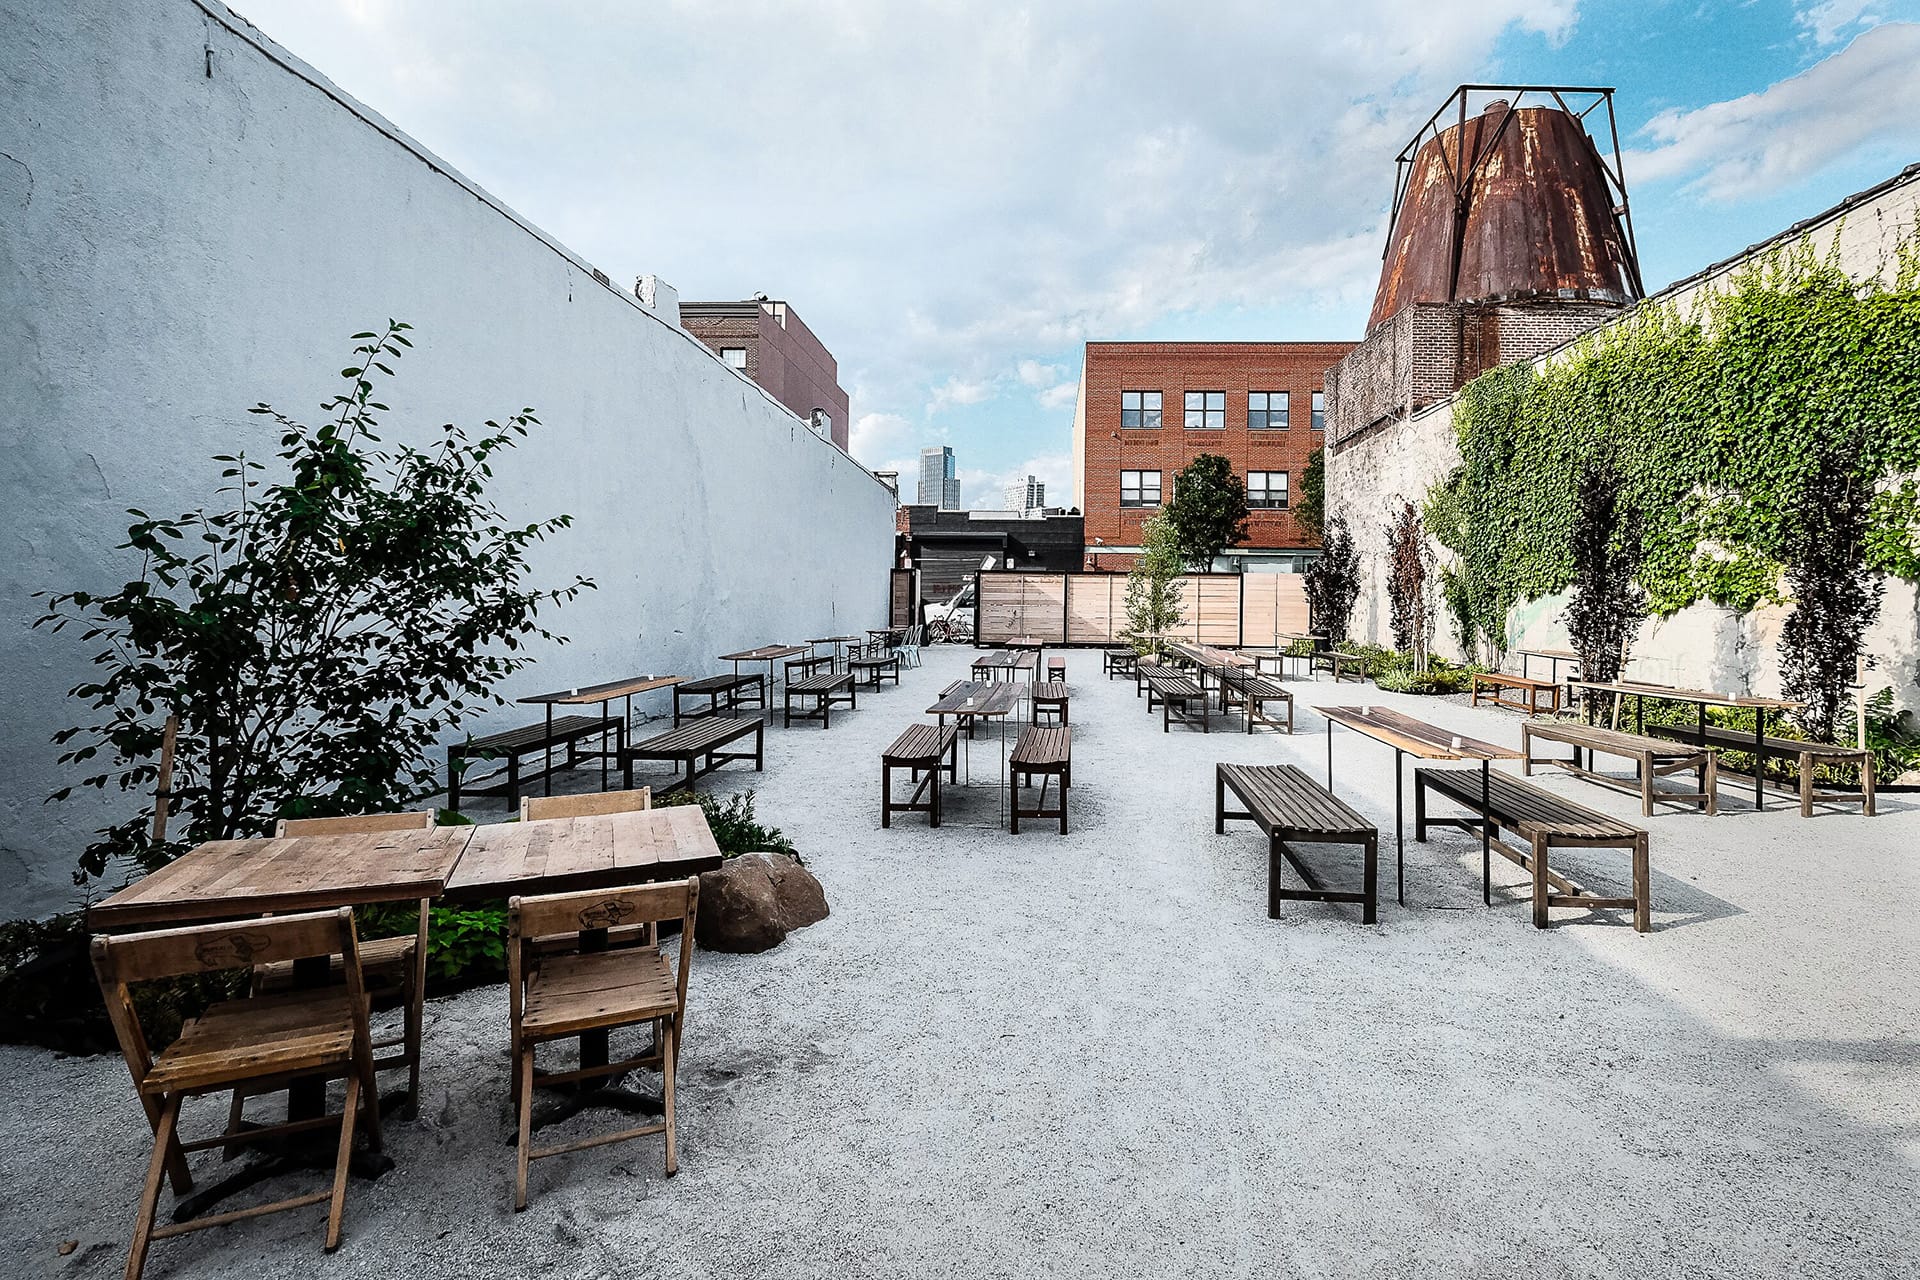 Gravel covered yard in Gowanus, Brooklyn, with many picnic tables for visitors to use.